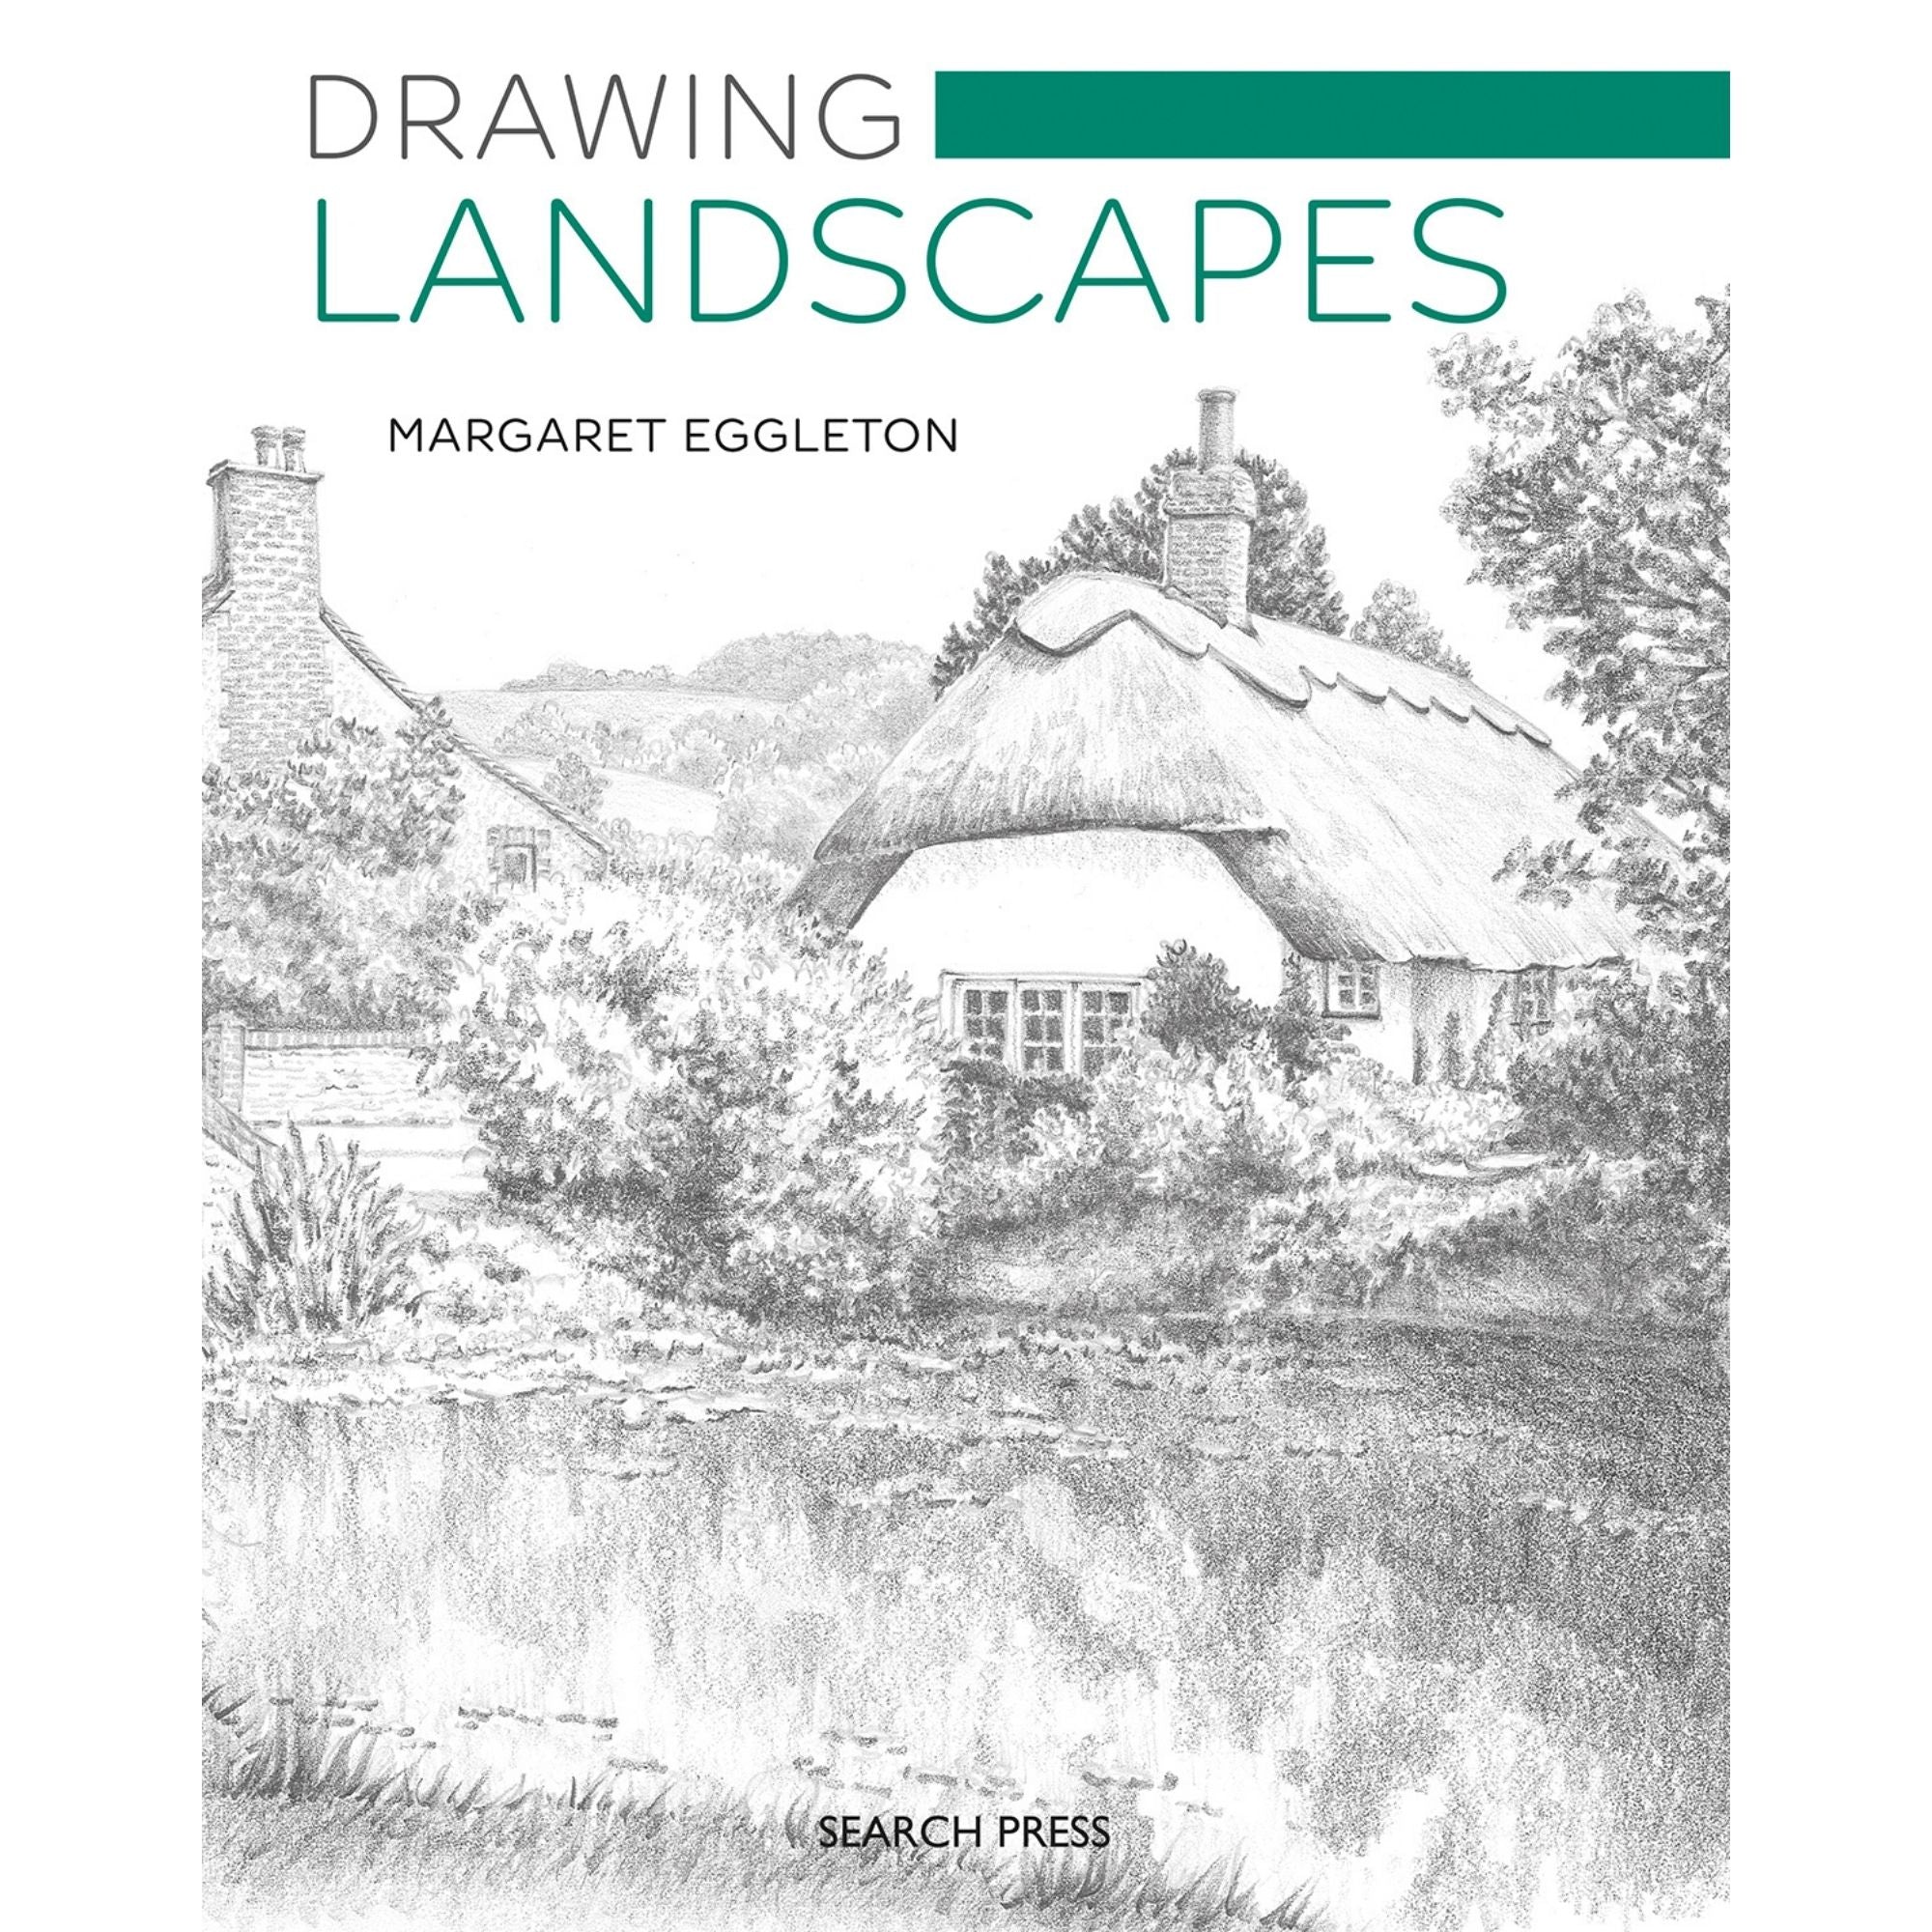 Easy scenery drawing Ideas with pencil #sketch, Pencil #drawing | landscape,  work of art, drawing | Easy scenery drawing Ideas with pencil sketch,  Pencil drawing #pencil #pencilsketch #pencildrawing #painting #artist  #scenerydrawing #artwork... |